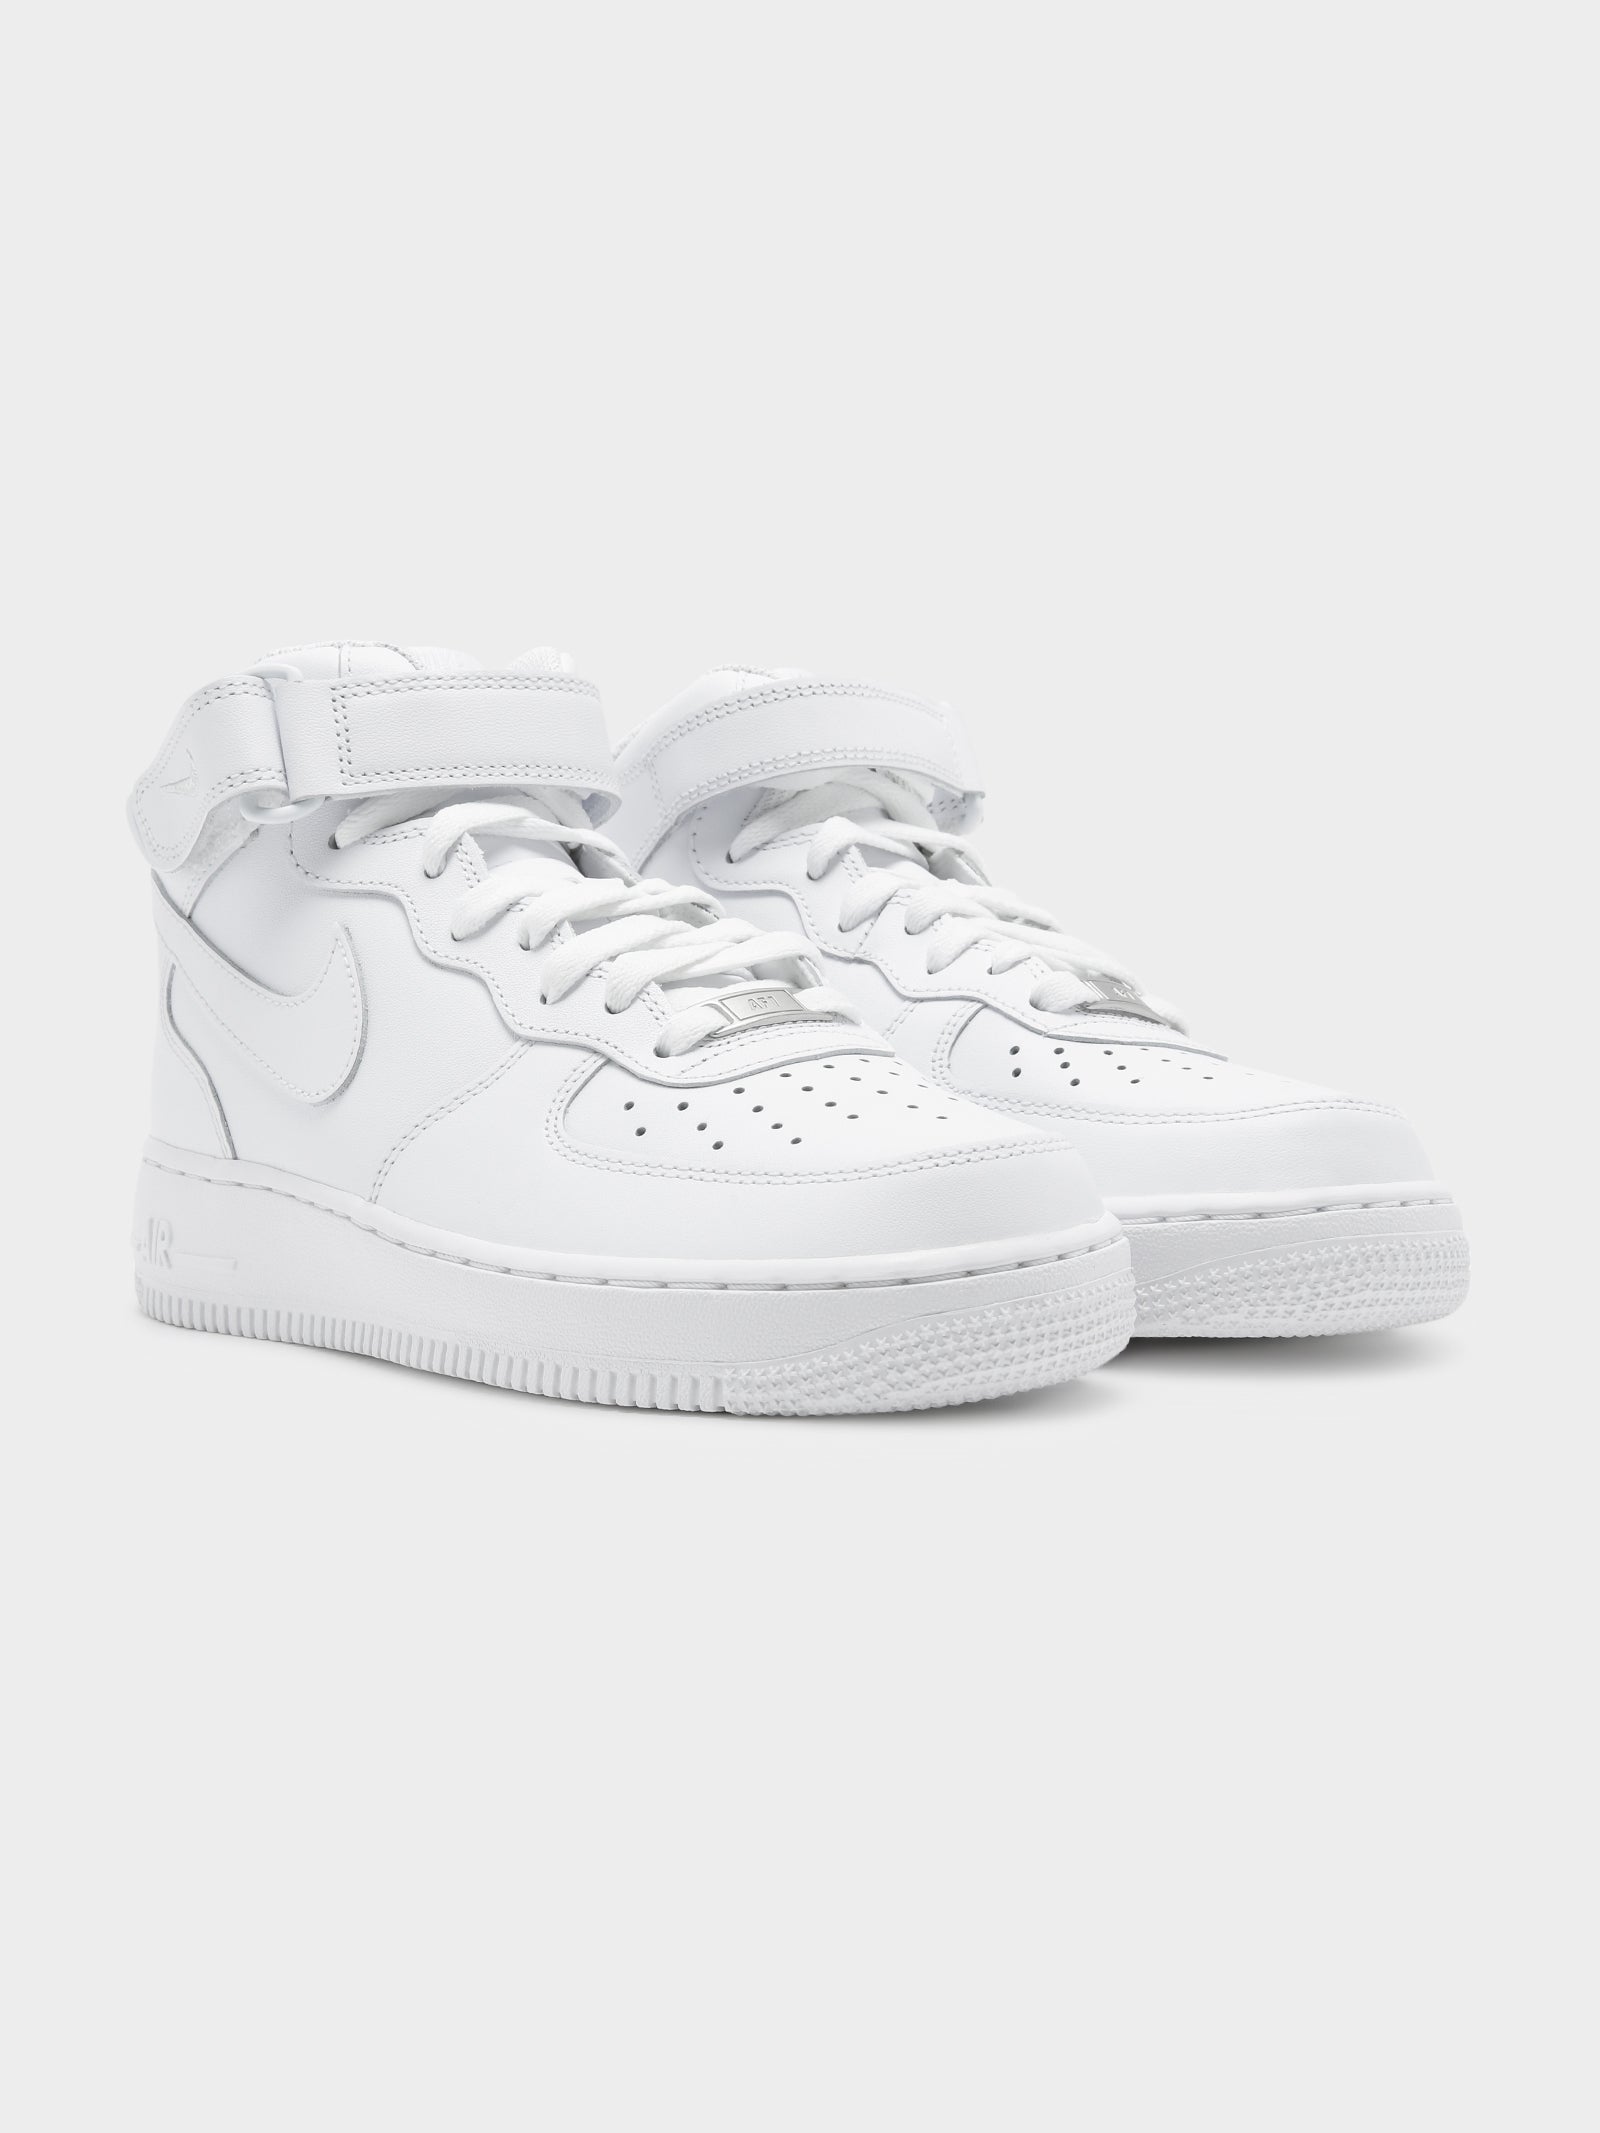 Womens Nike Air Force 1 Mid in Triple White